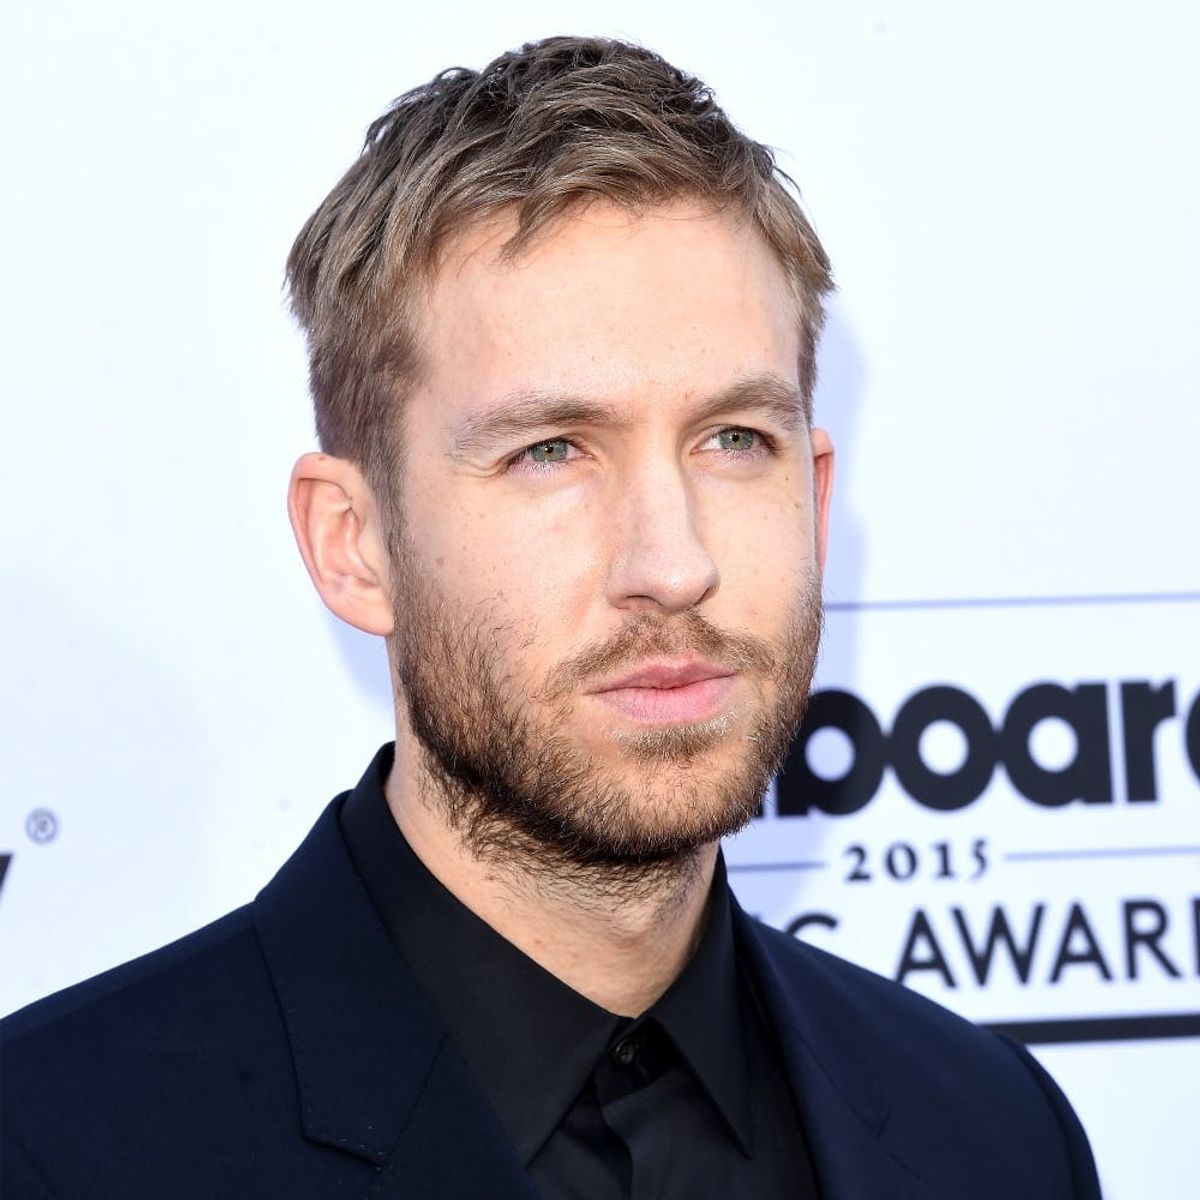 Calvin Harris Upped the Social Media Drama With These Bold Instagram Messages